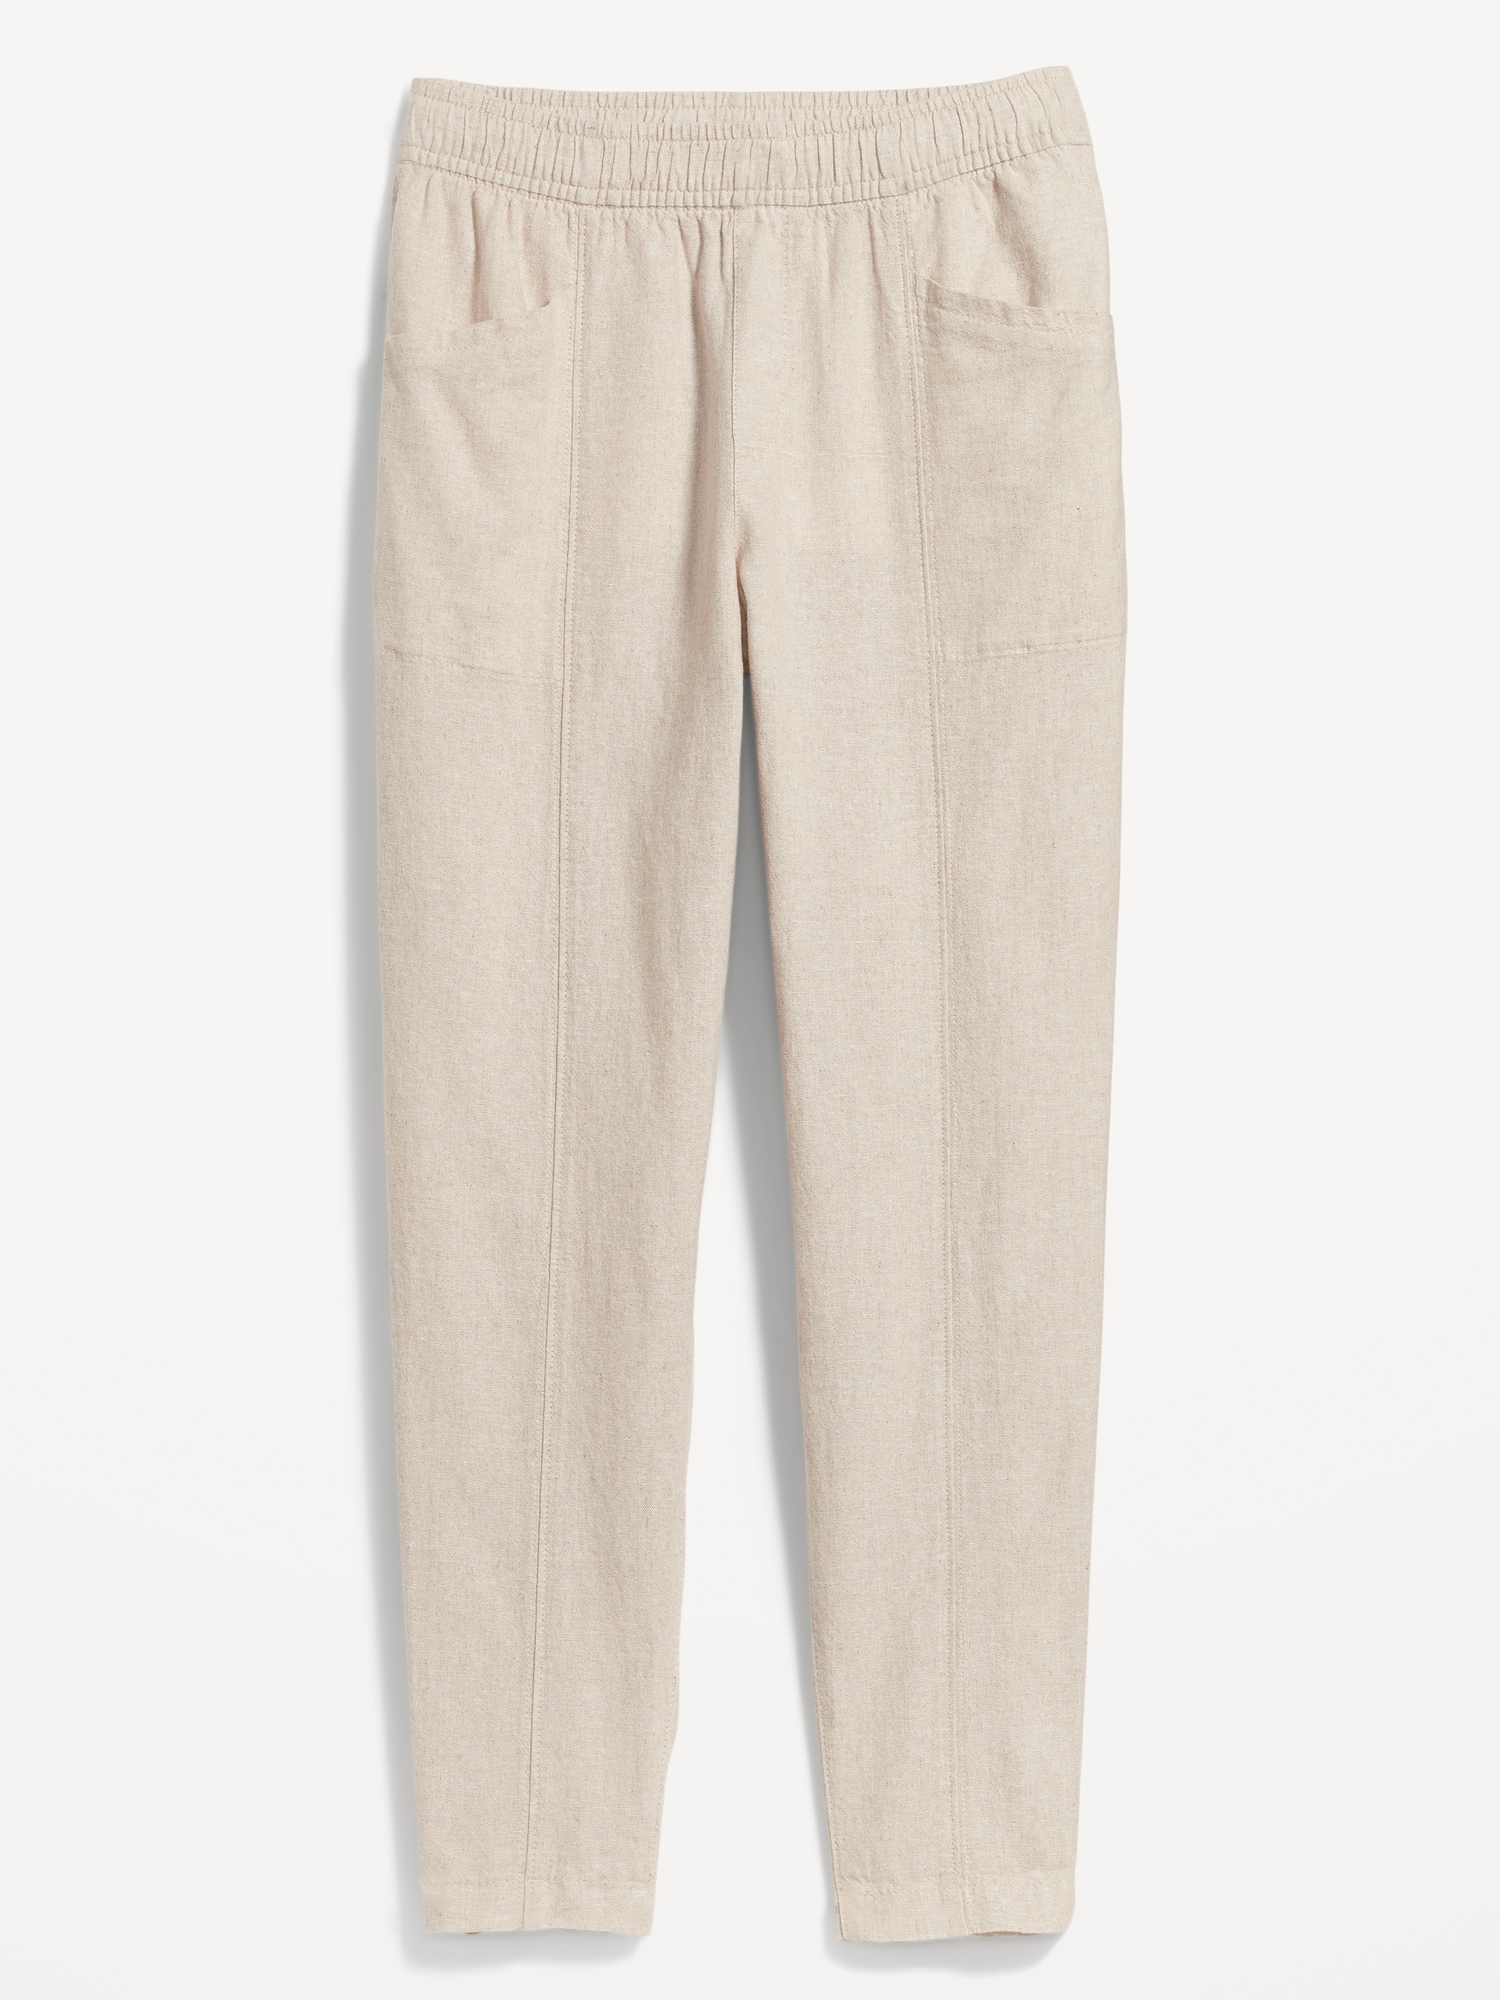 BRINLEY Linen Pants / Tapered Linen Trousers / Elegant Cropped